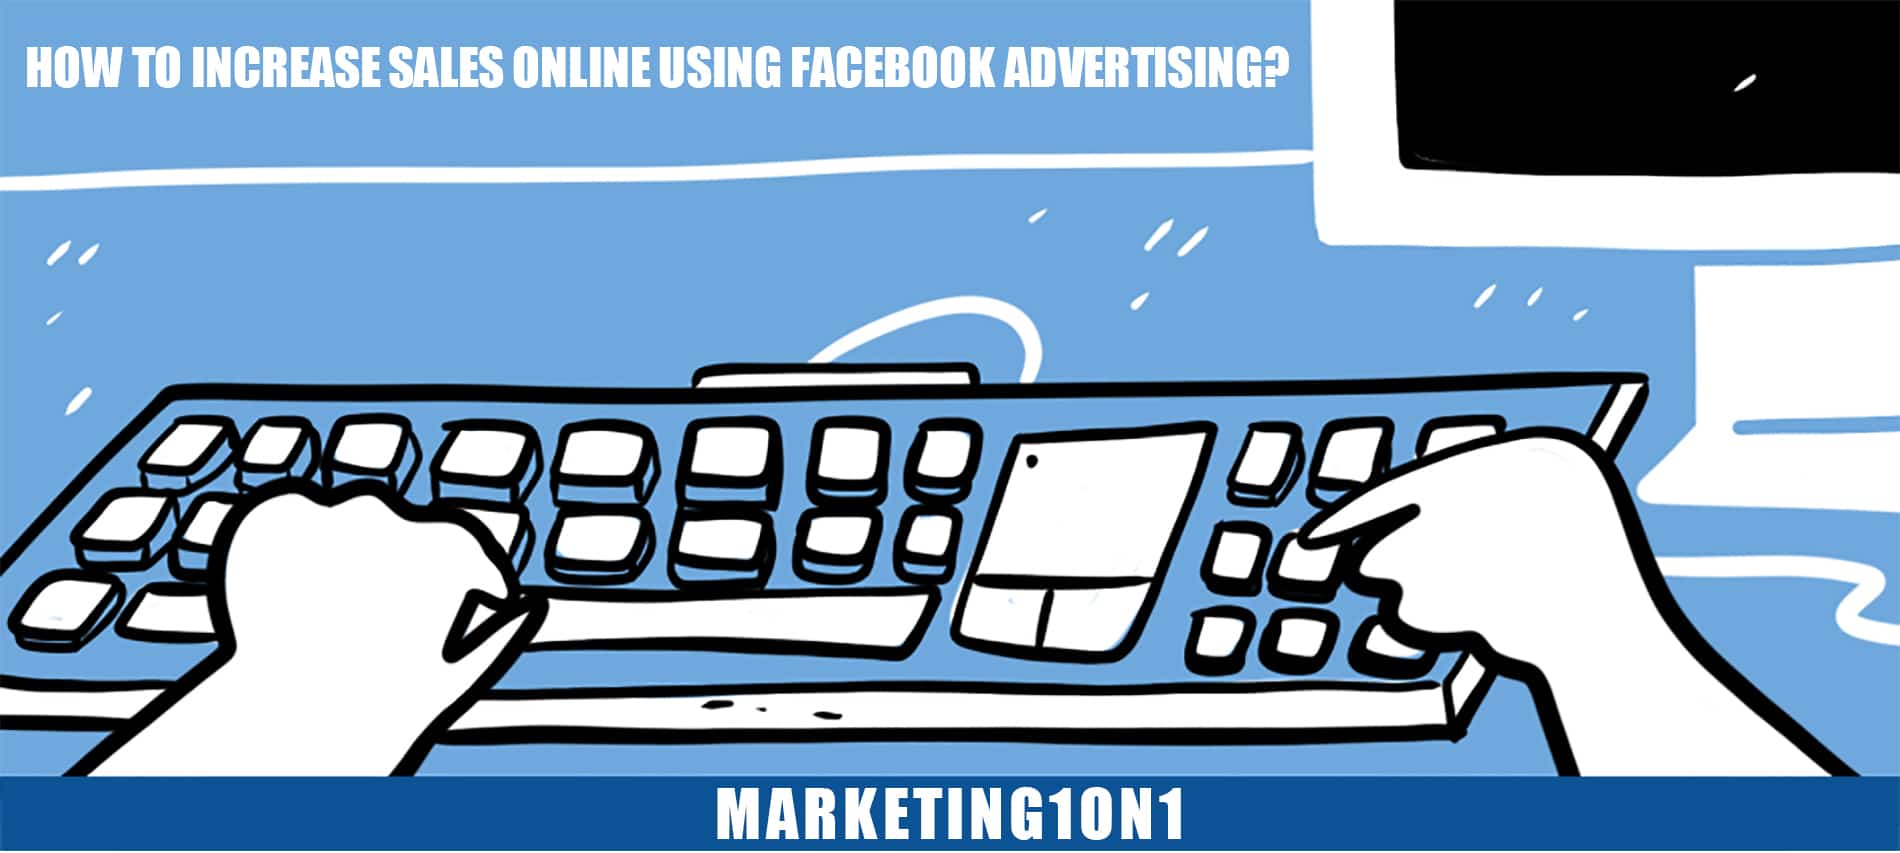 How to increase sales online using Facebook advertising?